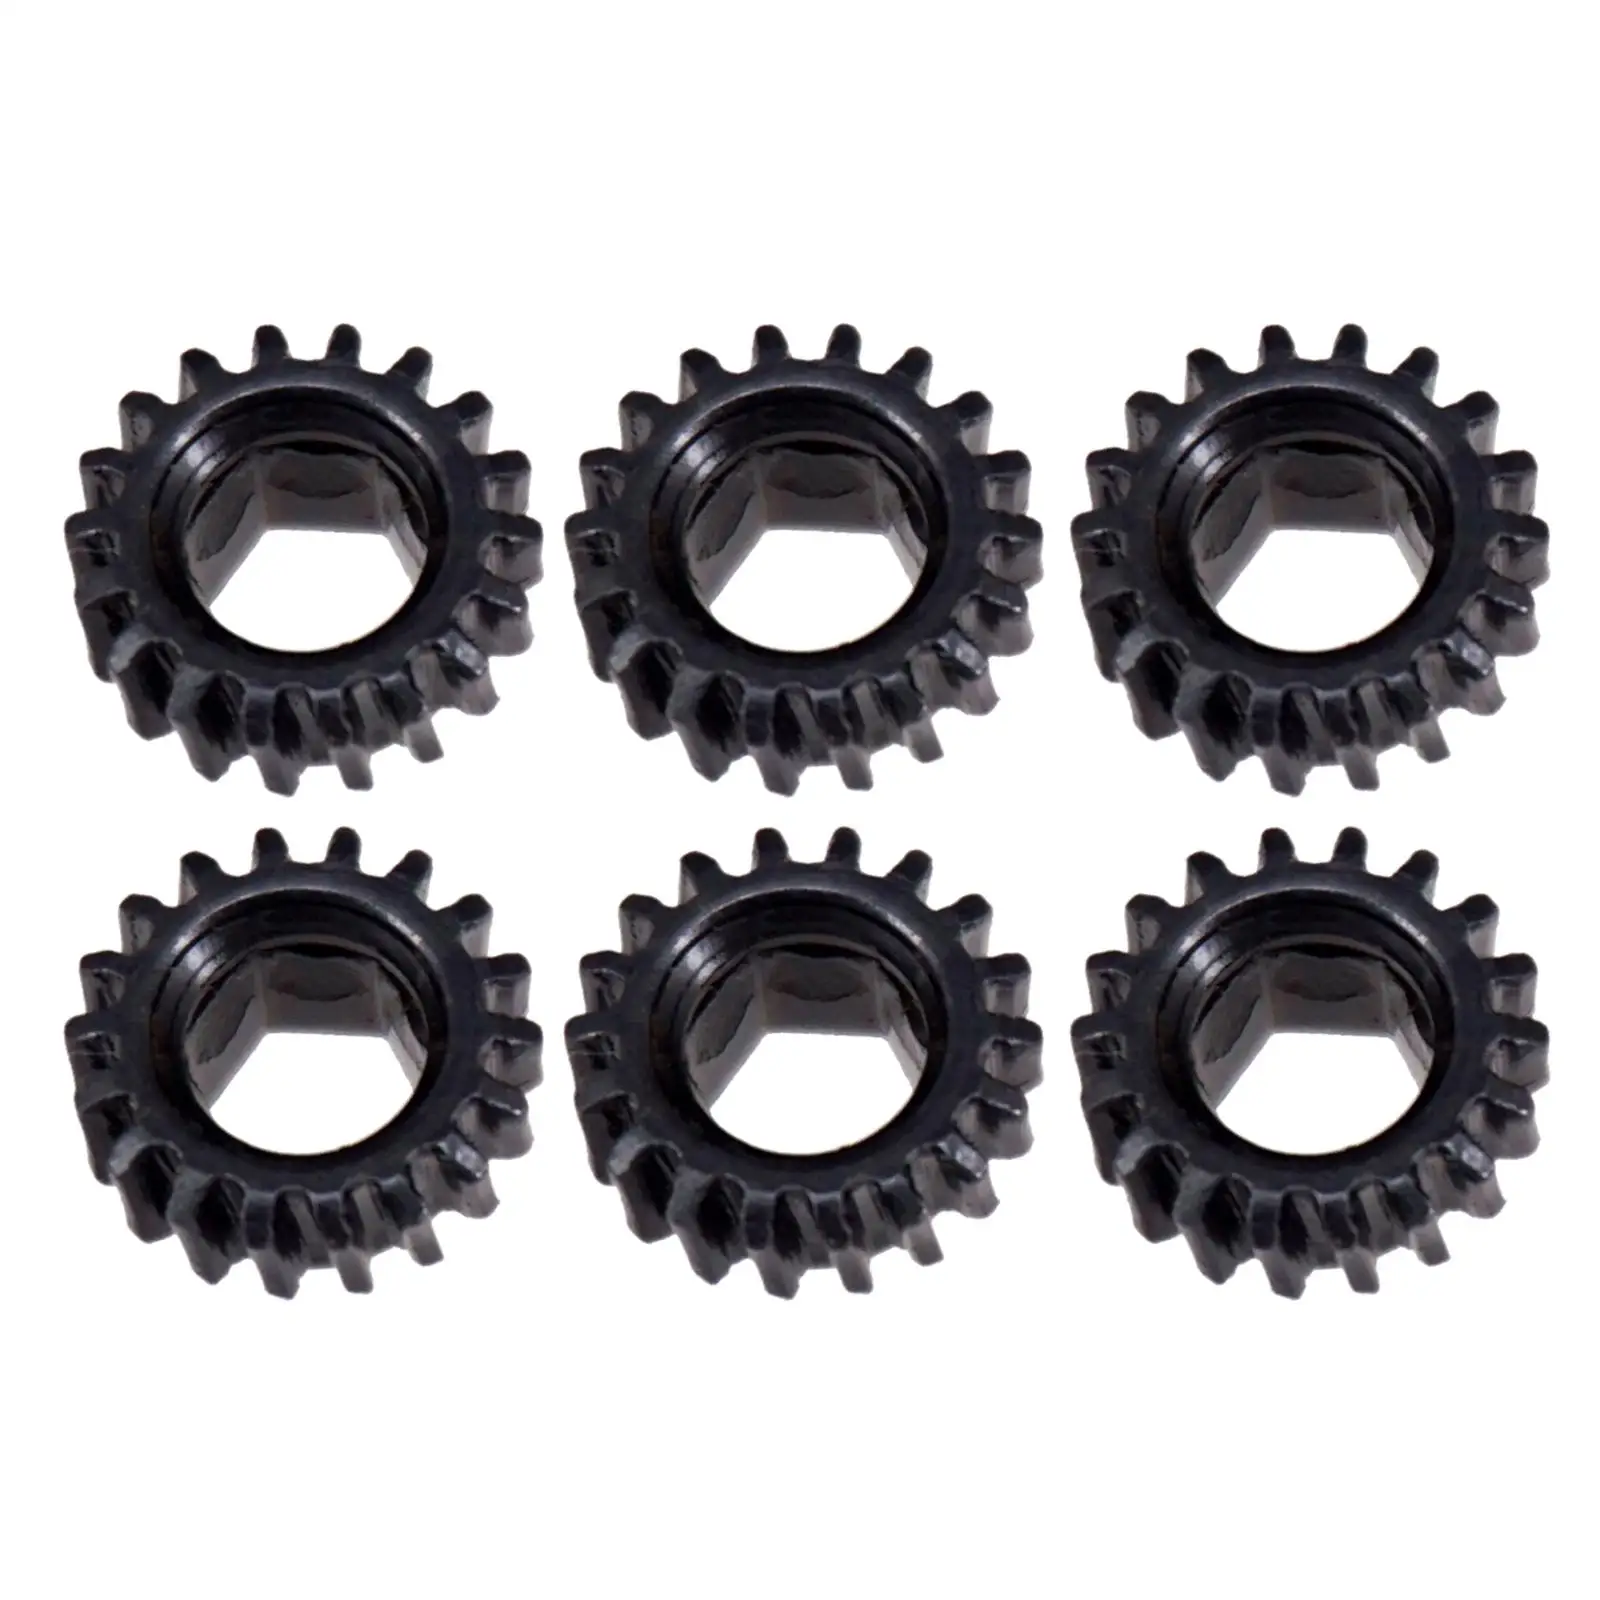 6pcs Classical Pegs Machine Heads Mount Hex Hole Gears 1:18/1:15